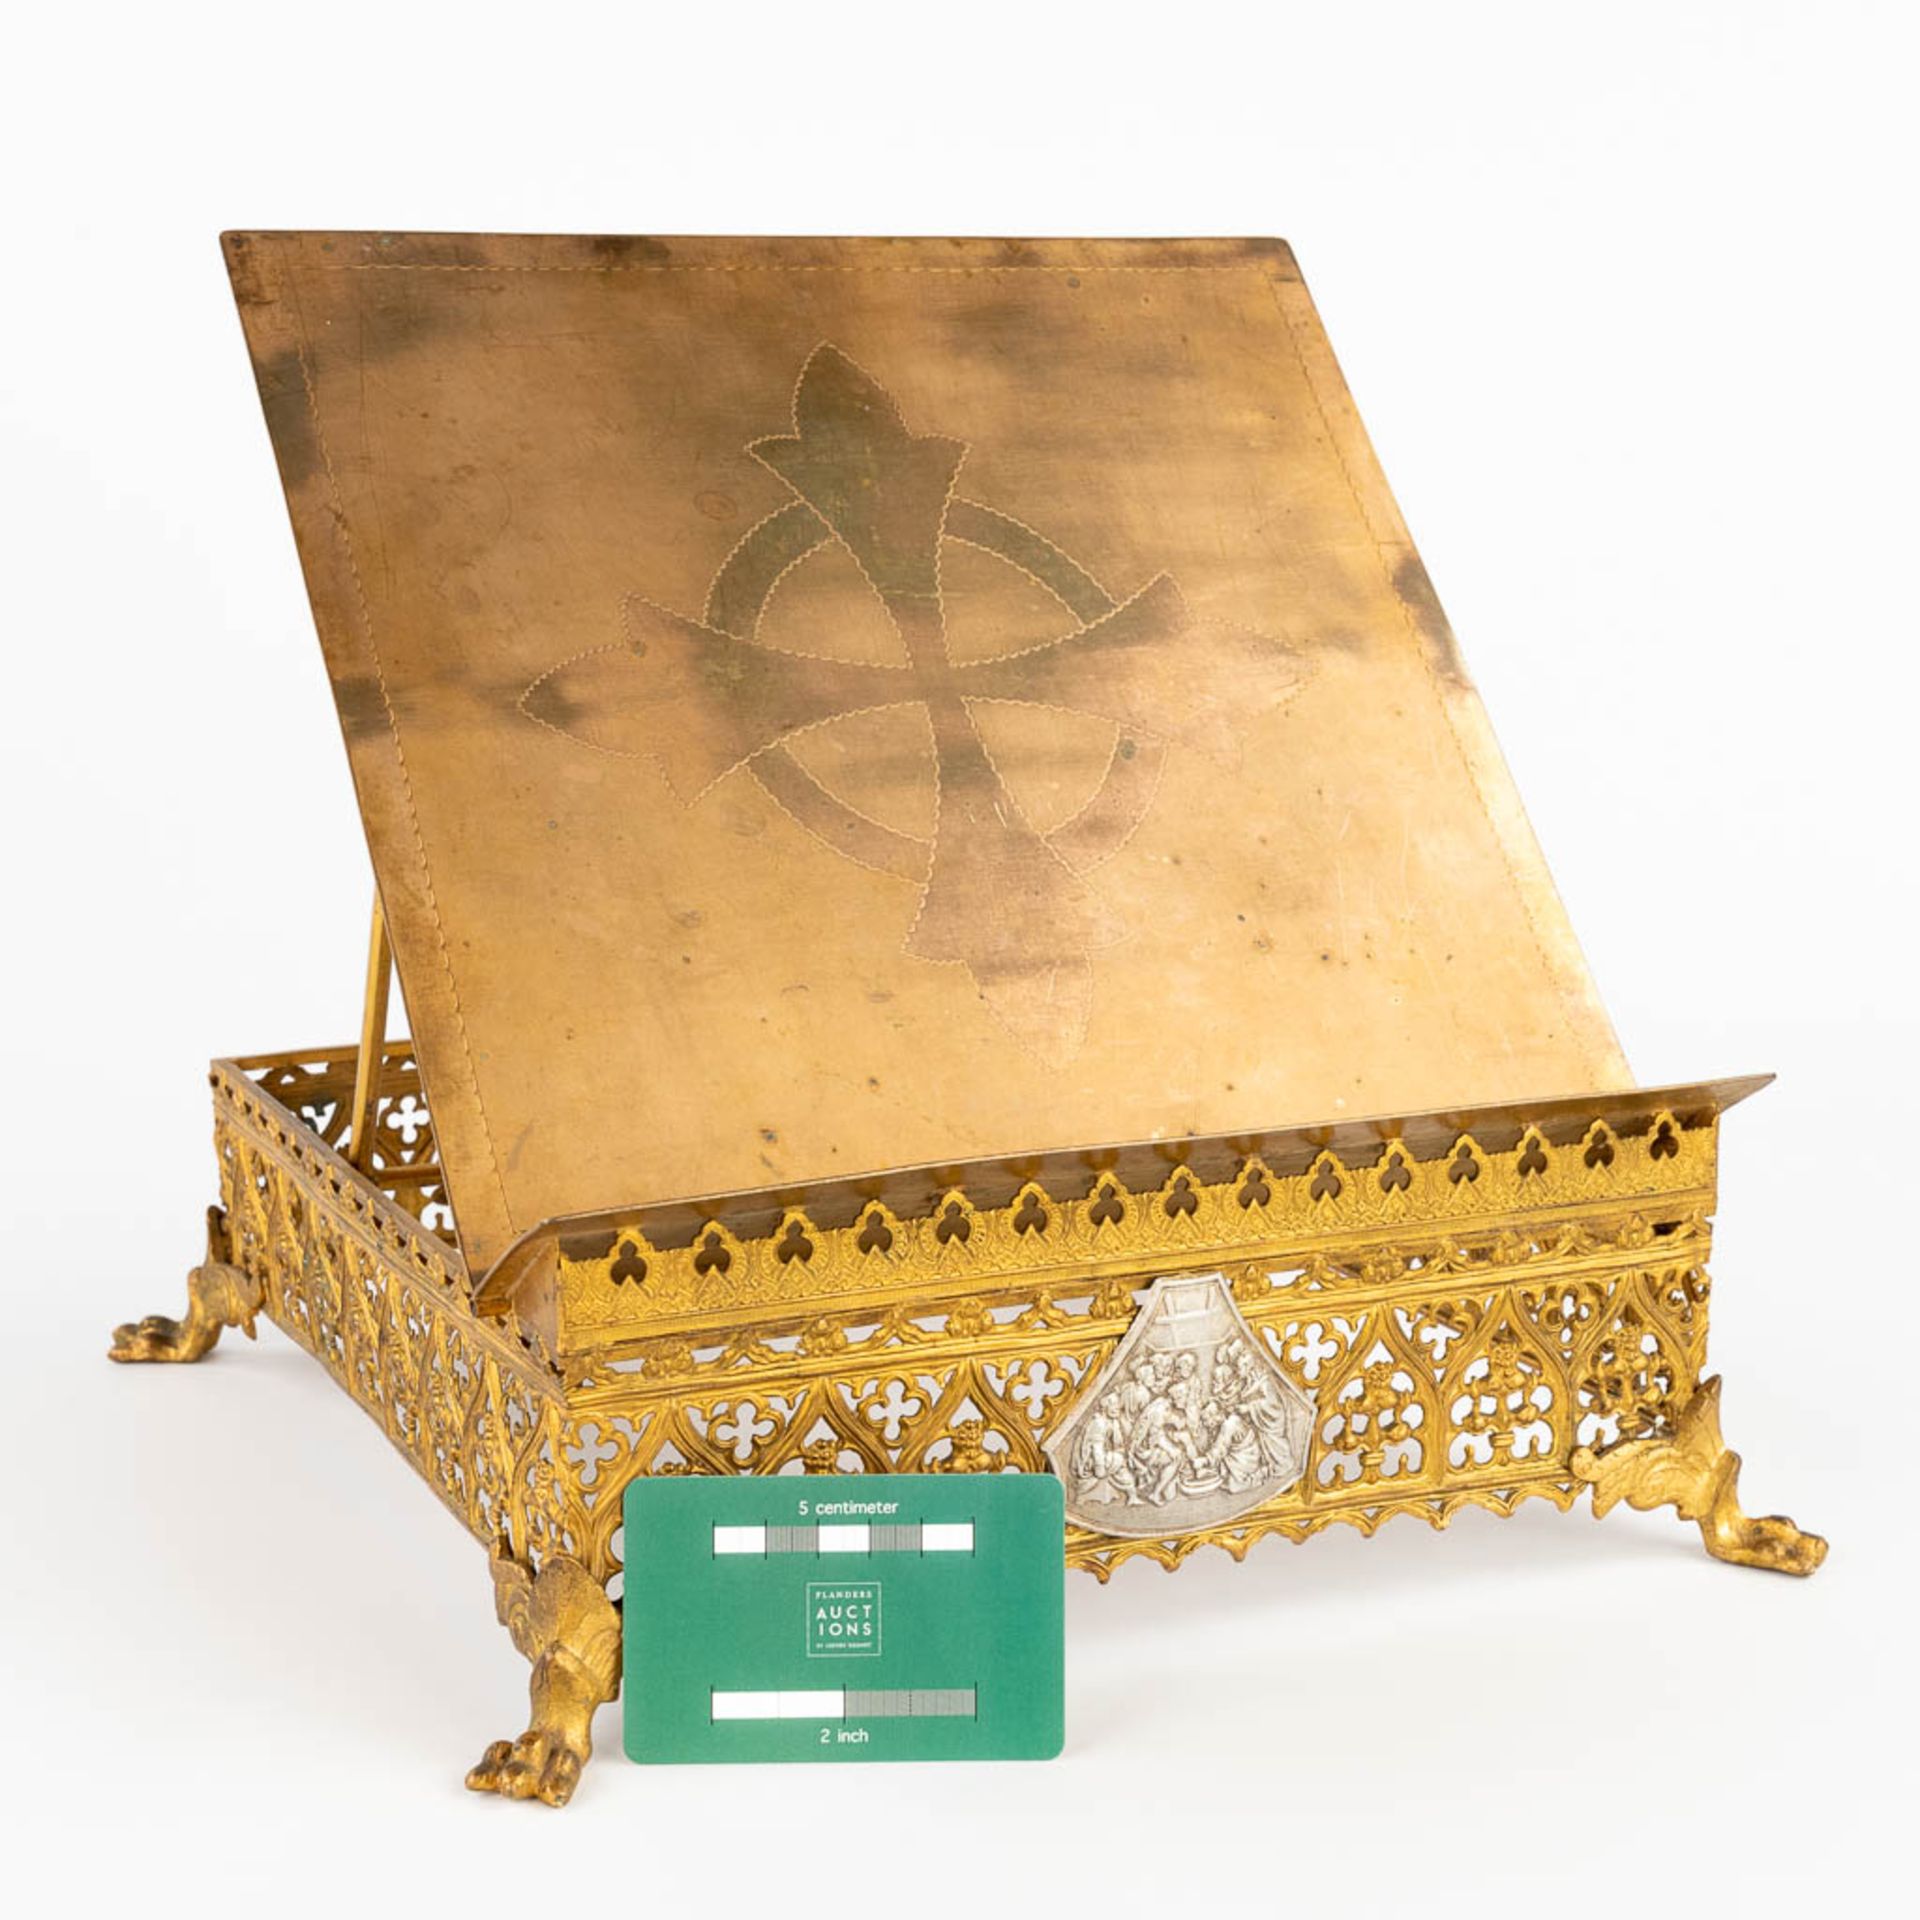 A lectern, brass in Gothic Revival style. Circa 1900. (L:31 x W:31 x H:11 cm) - Image 2 of 11